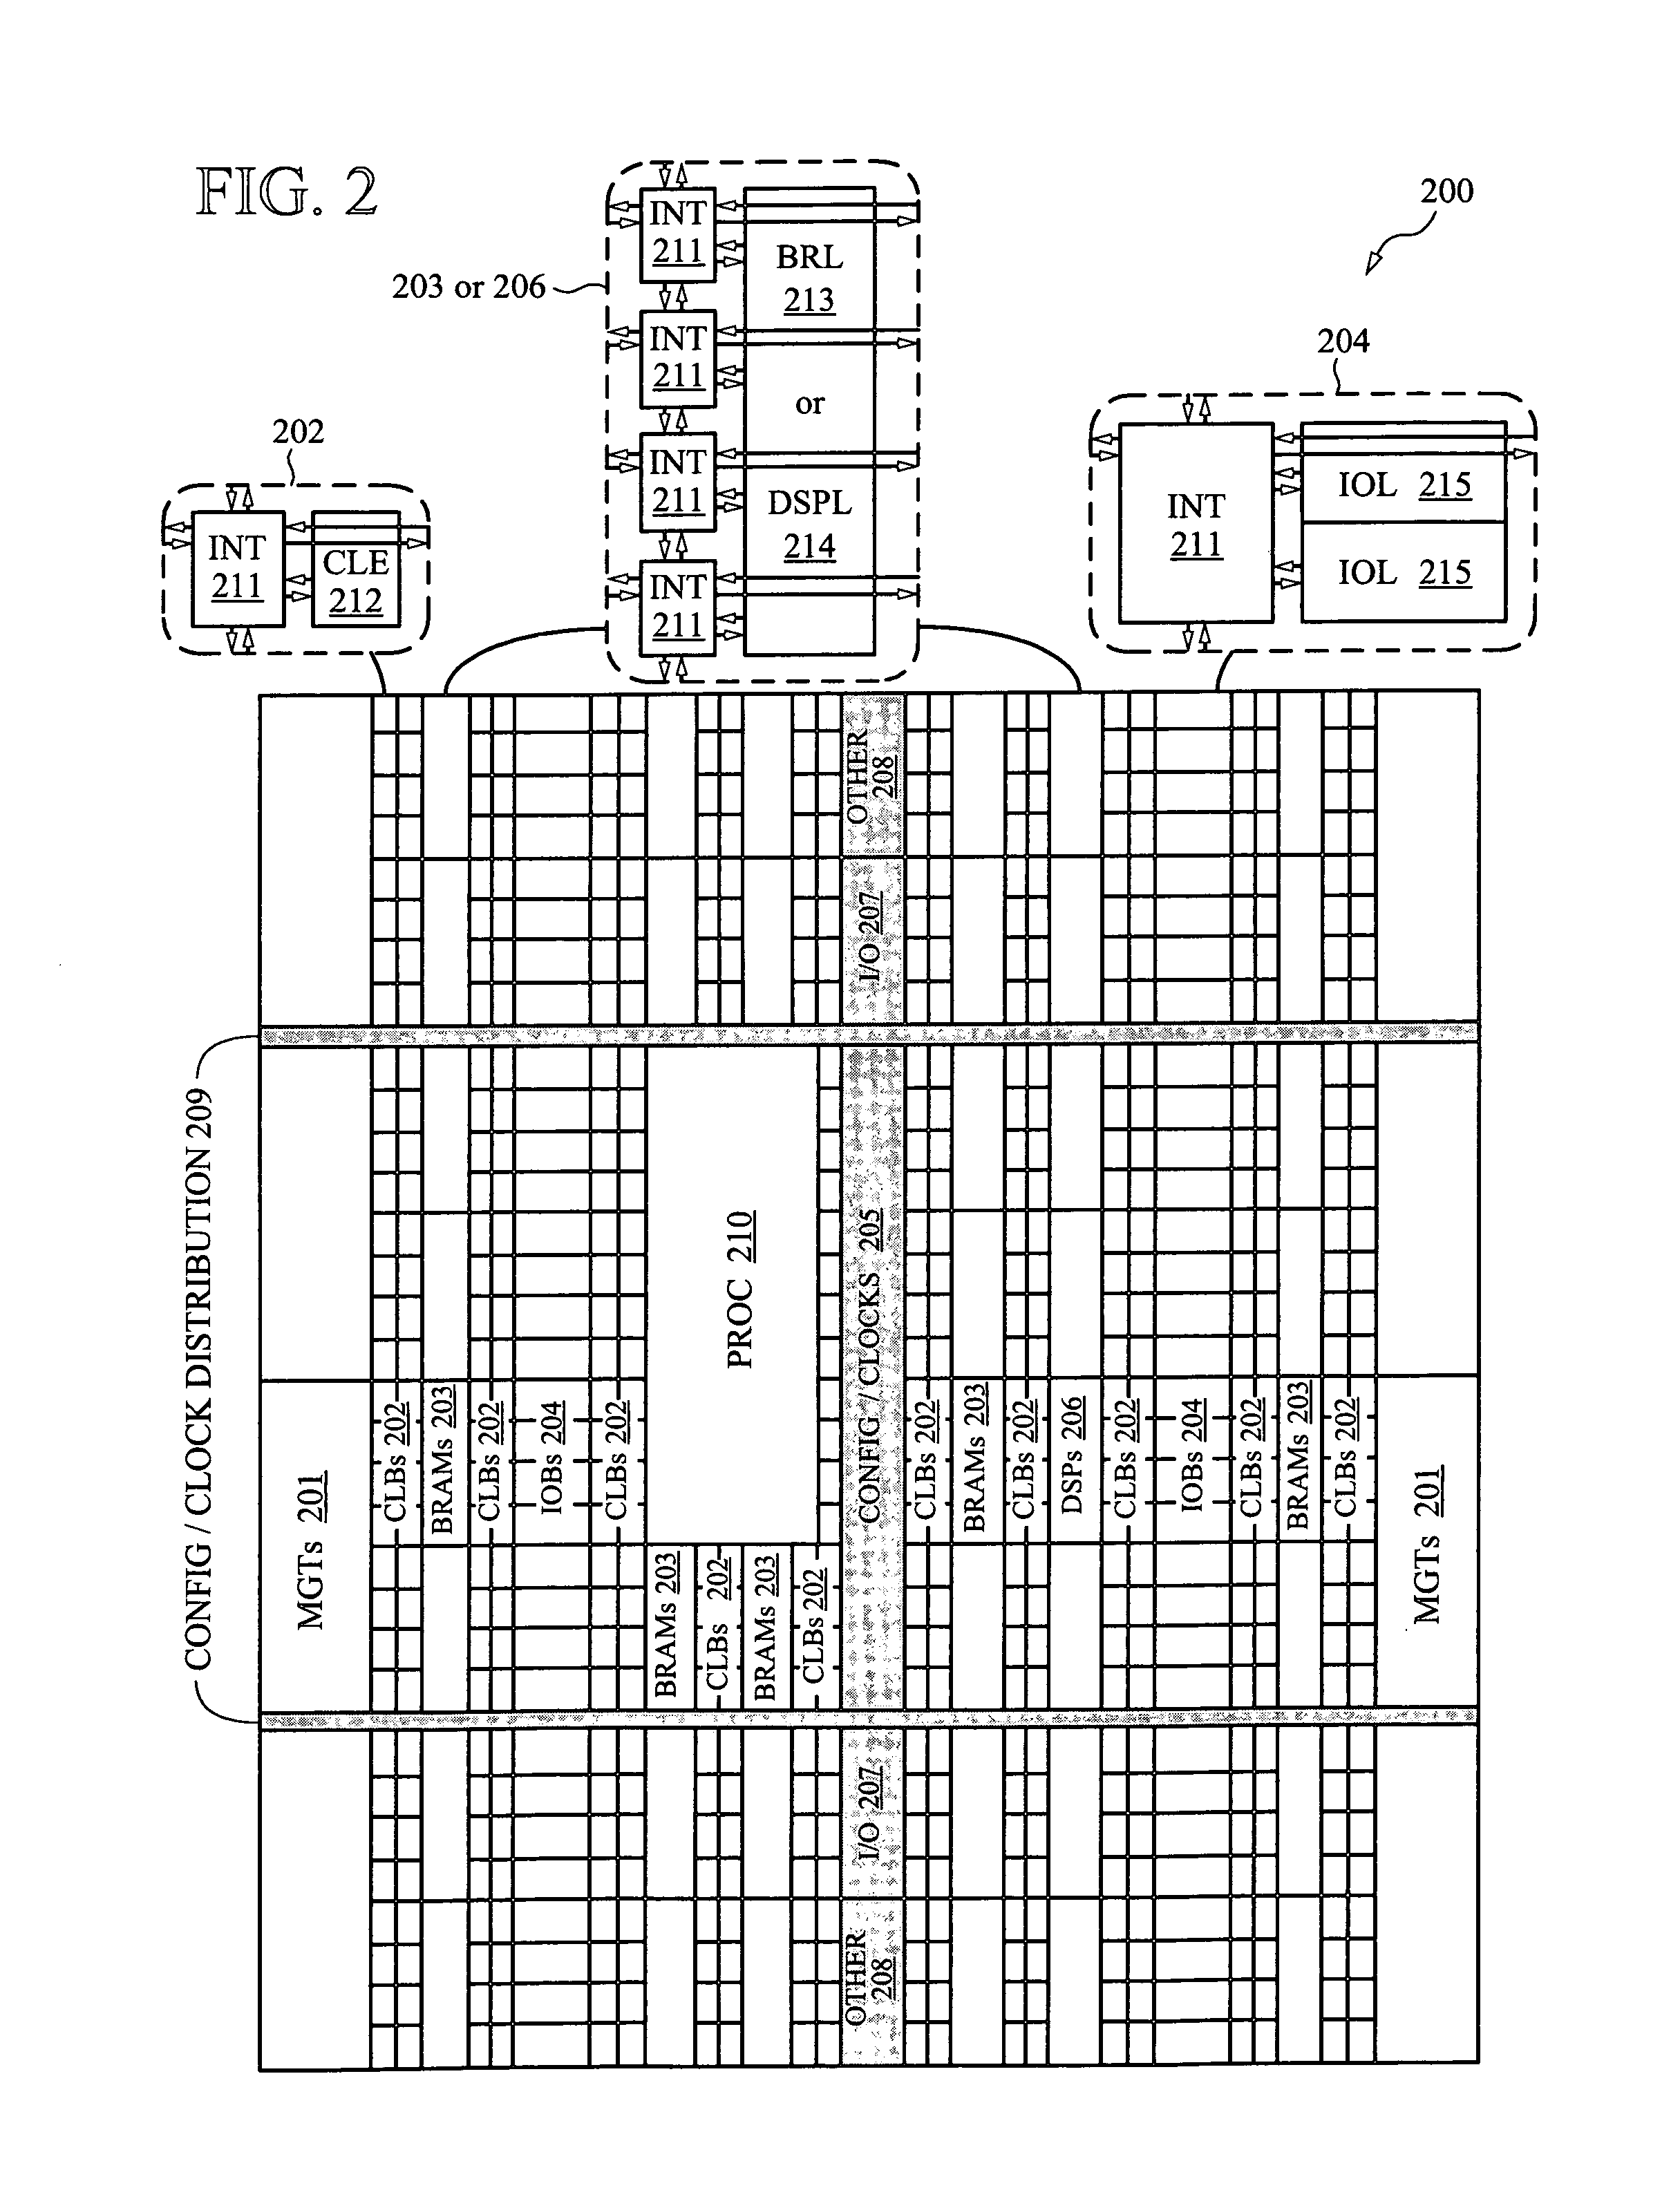 Single event upset tolerant memory cell layout